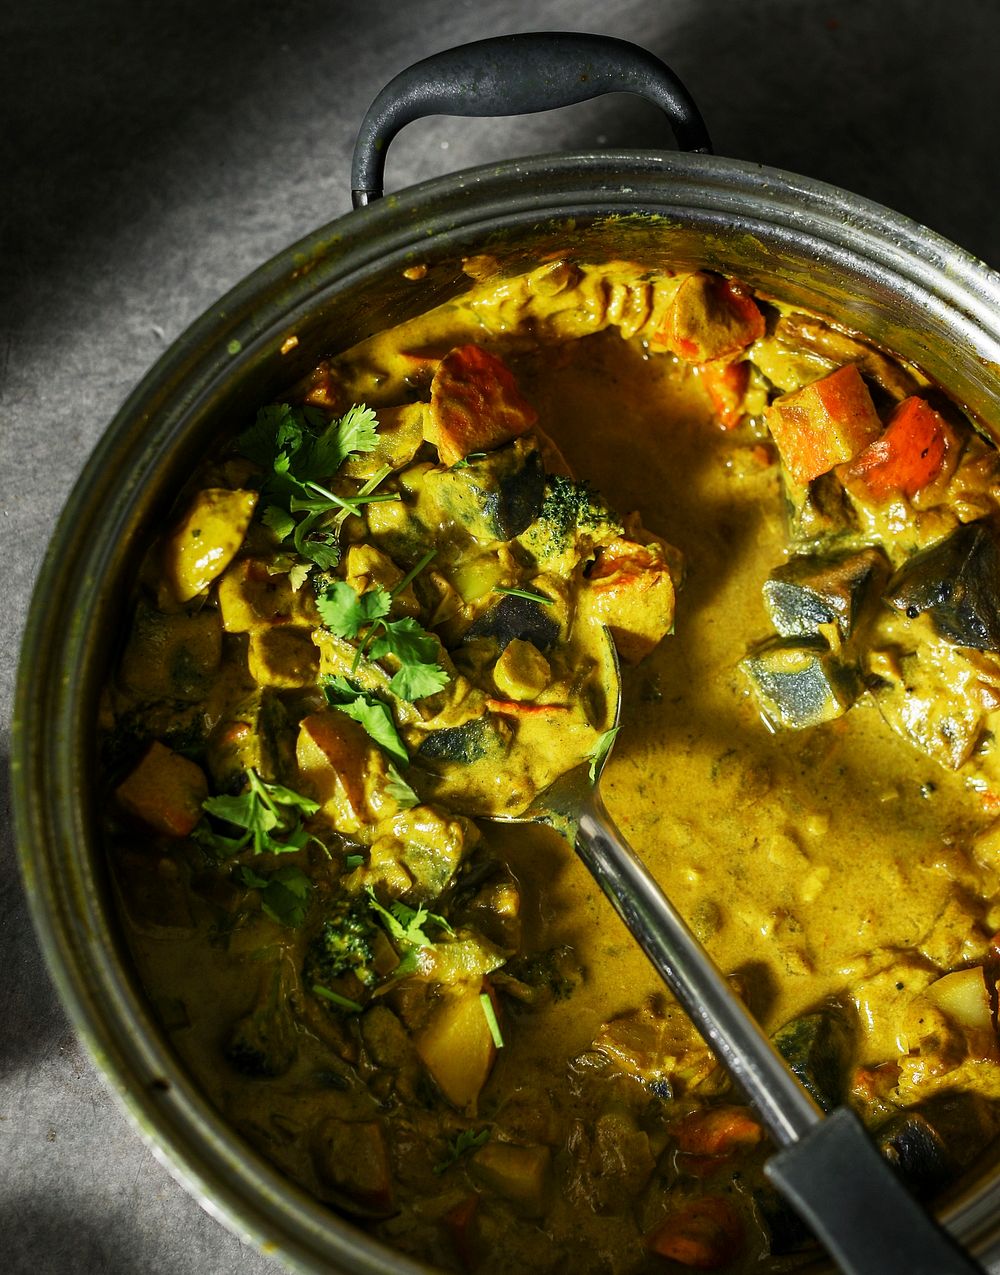 Freshly cooked vegetable curry in a pot